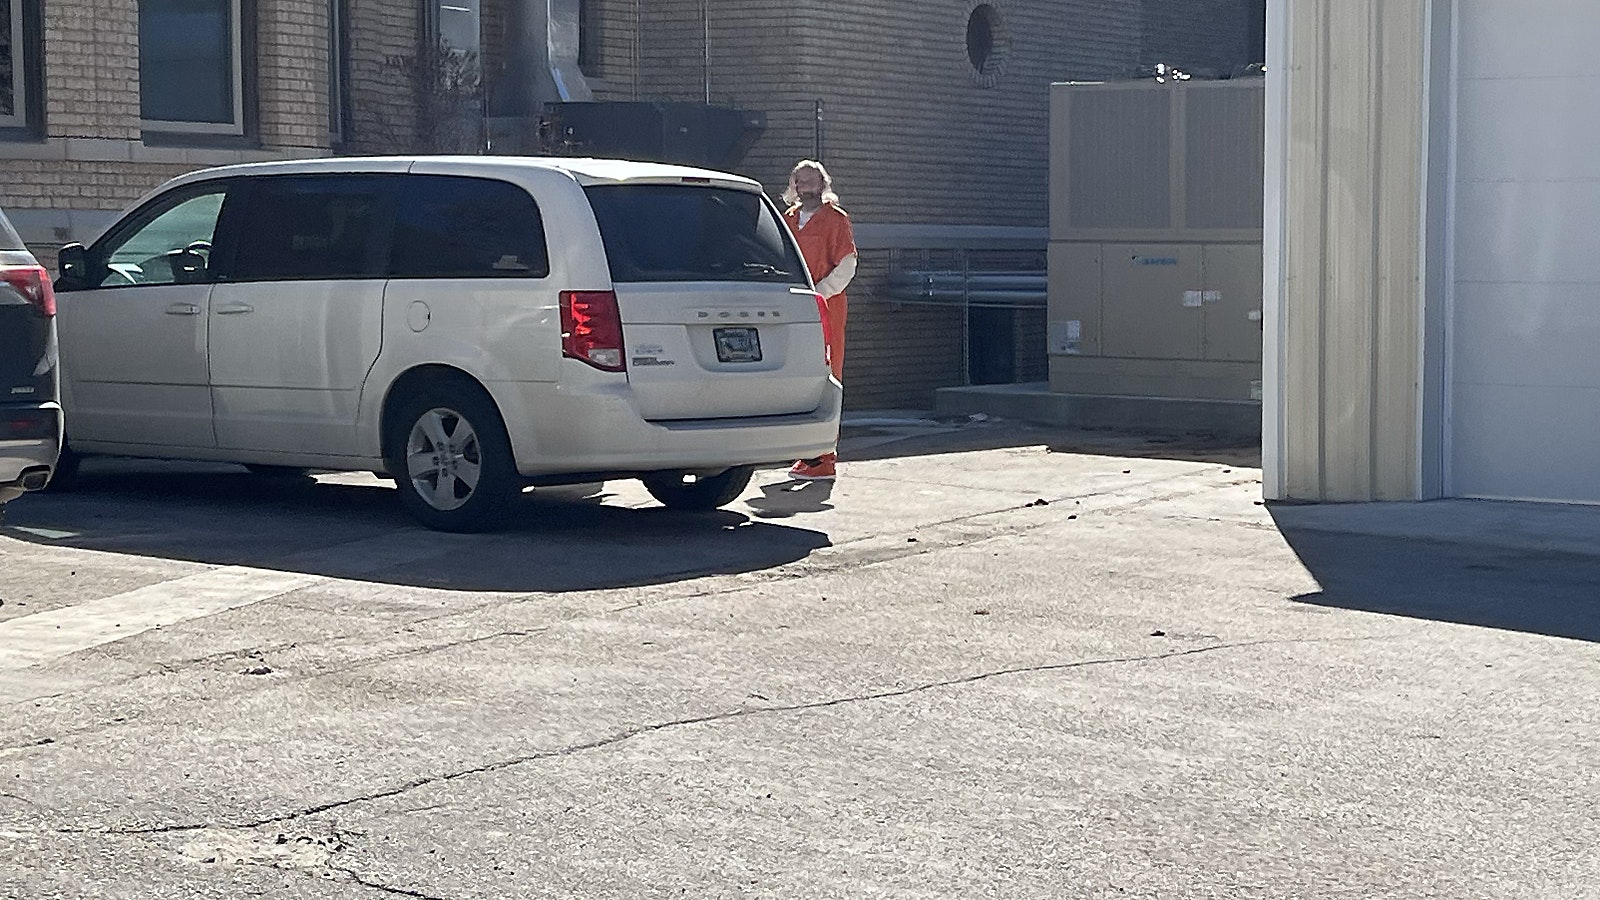 Wearing his jail-issued orange jumpsuit, Arthur Nelson is transported from the Carbon County Courthouse in Rawlins on Wednesday morning.